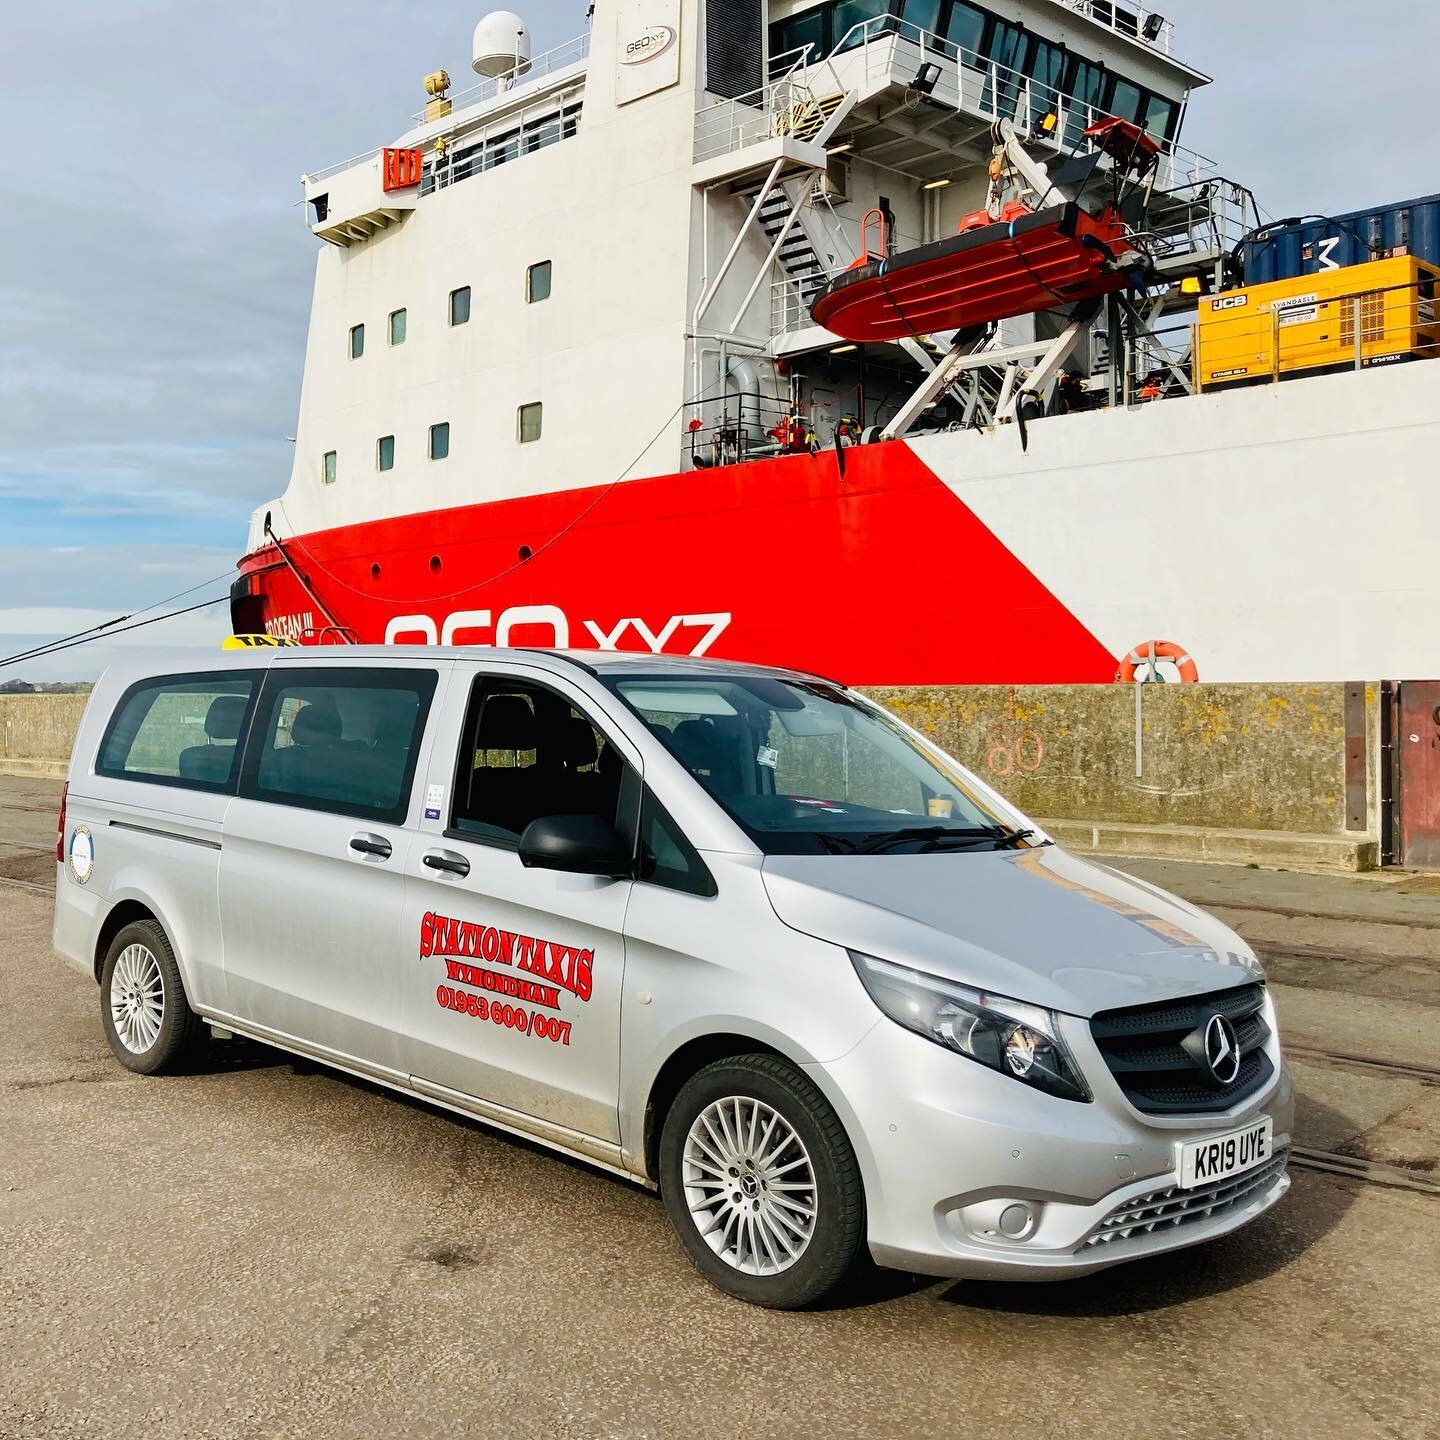 We have been really lucky this last couple weeks. Work is slowly picking up. Plenty hospital and surgery trips. As well as the odd port!  Here for your essential travel. 07765 402602. #wymondhamnorfolk #taxi #publicservice #gettingbusy #workaftercovi